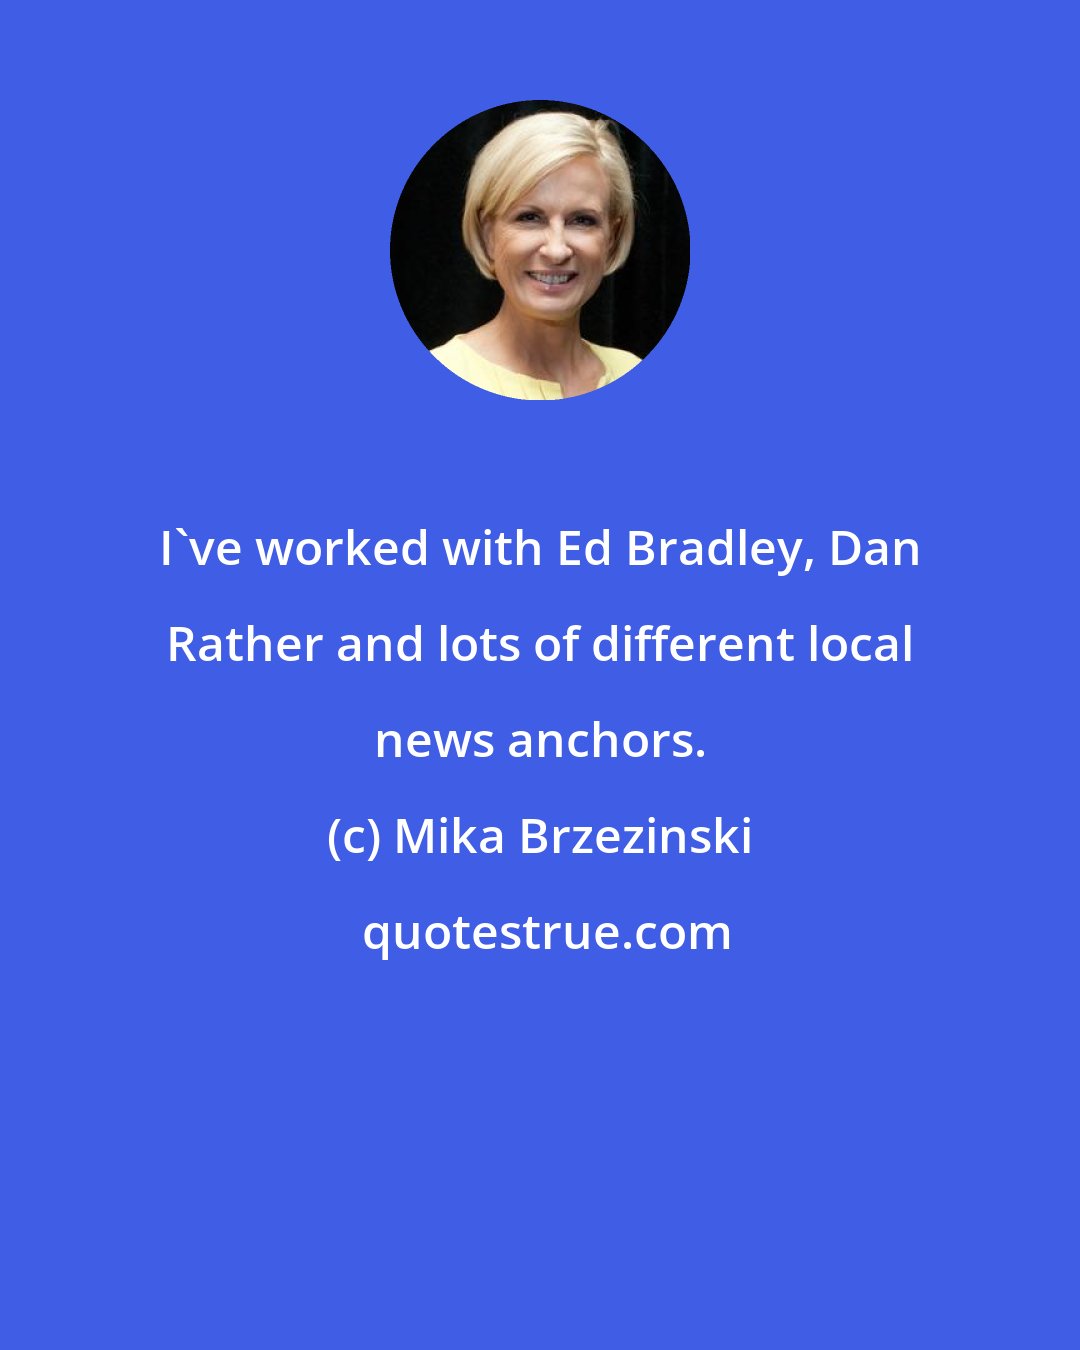 Mika Brzezinski: I've worked with Ed Bradley, Dan Rather and lots of different local news anchors.